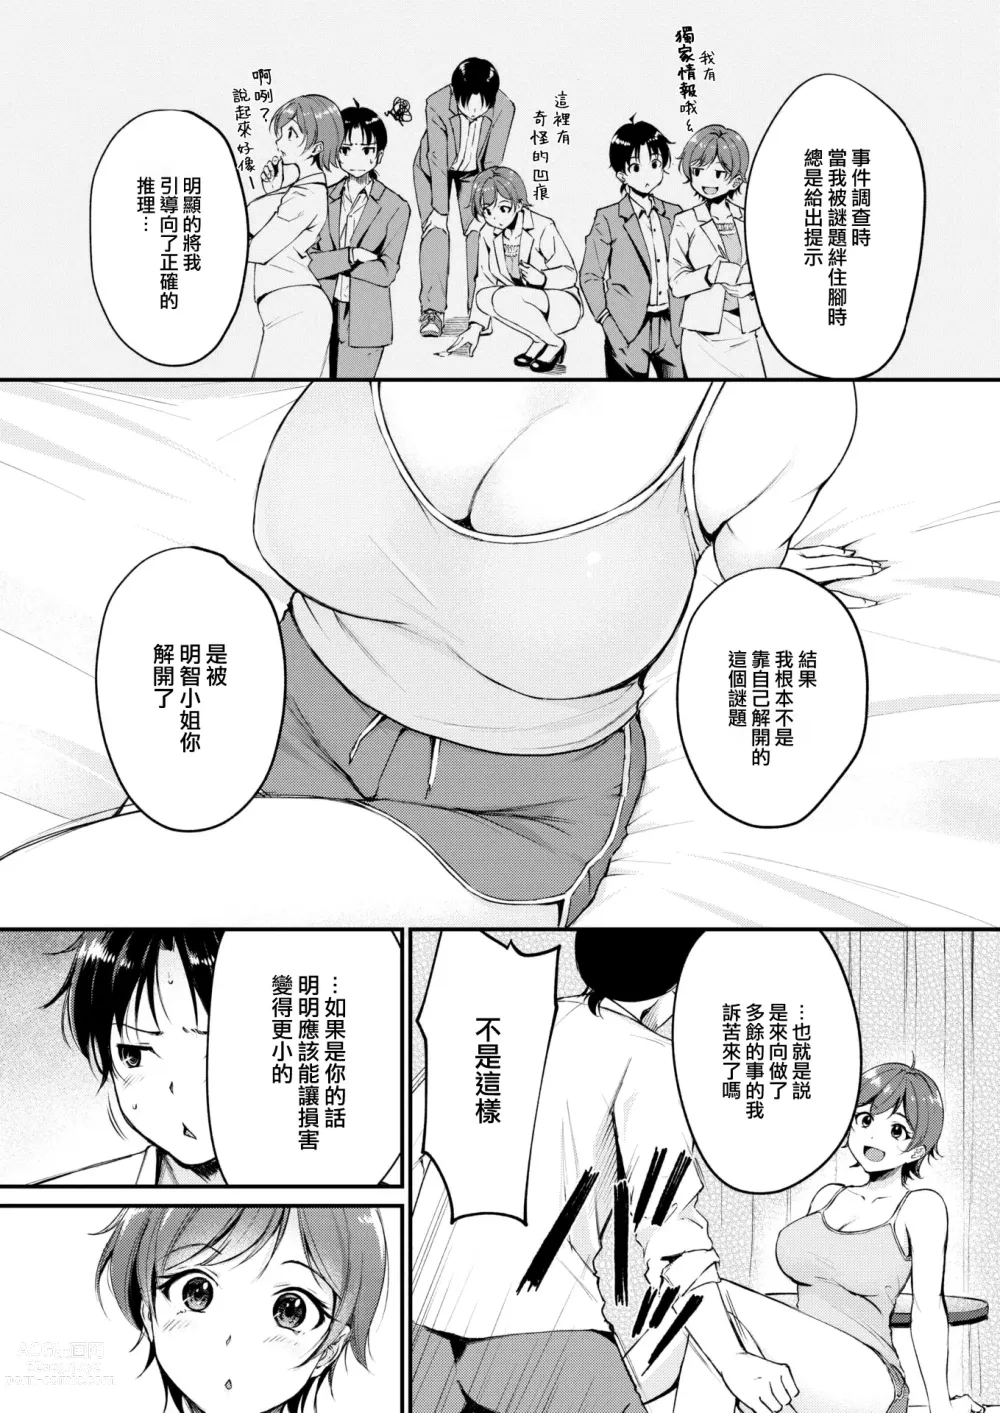 Page 6 of doujinshi えっちは謎解きのあとで